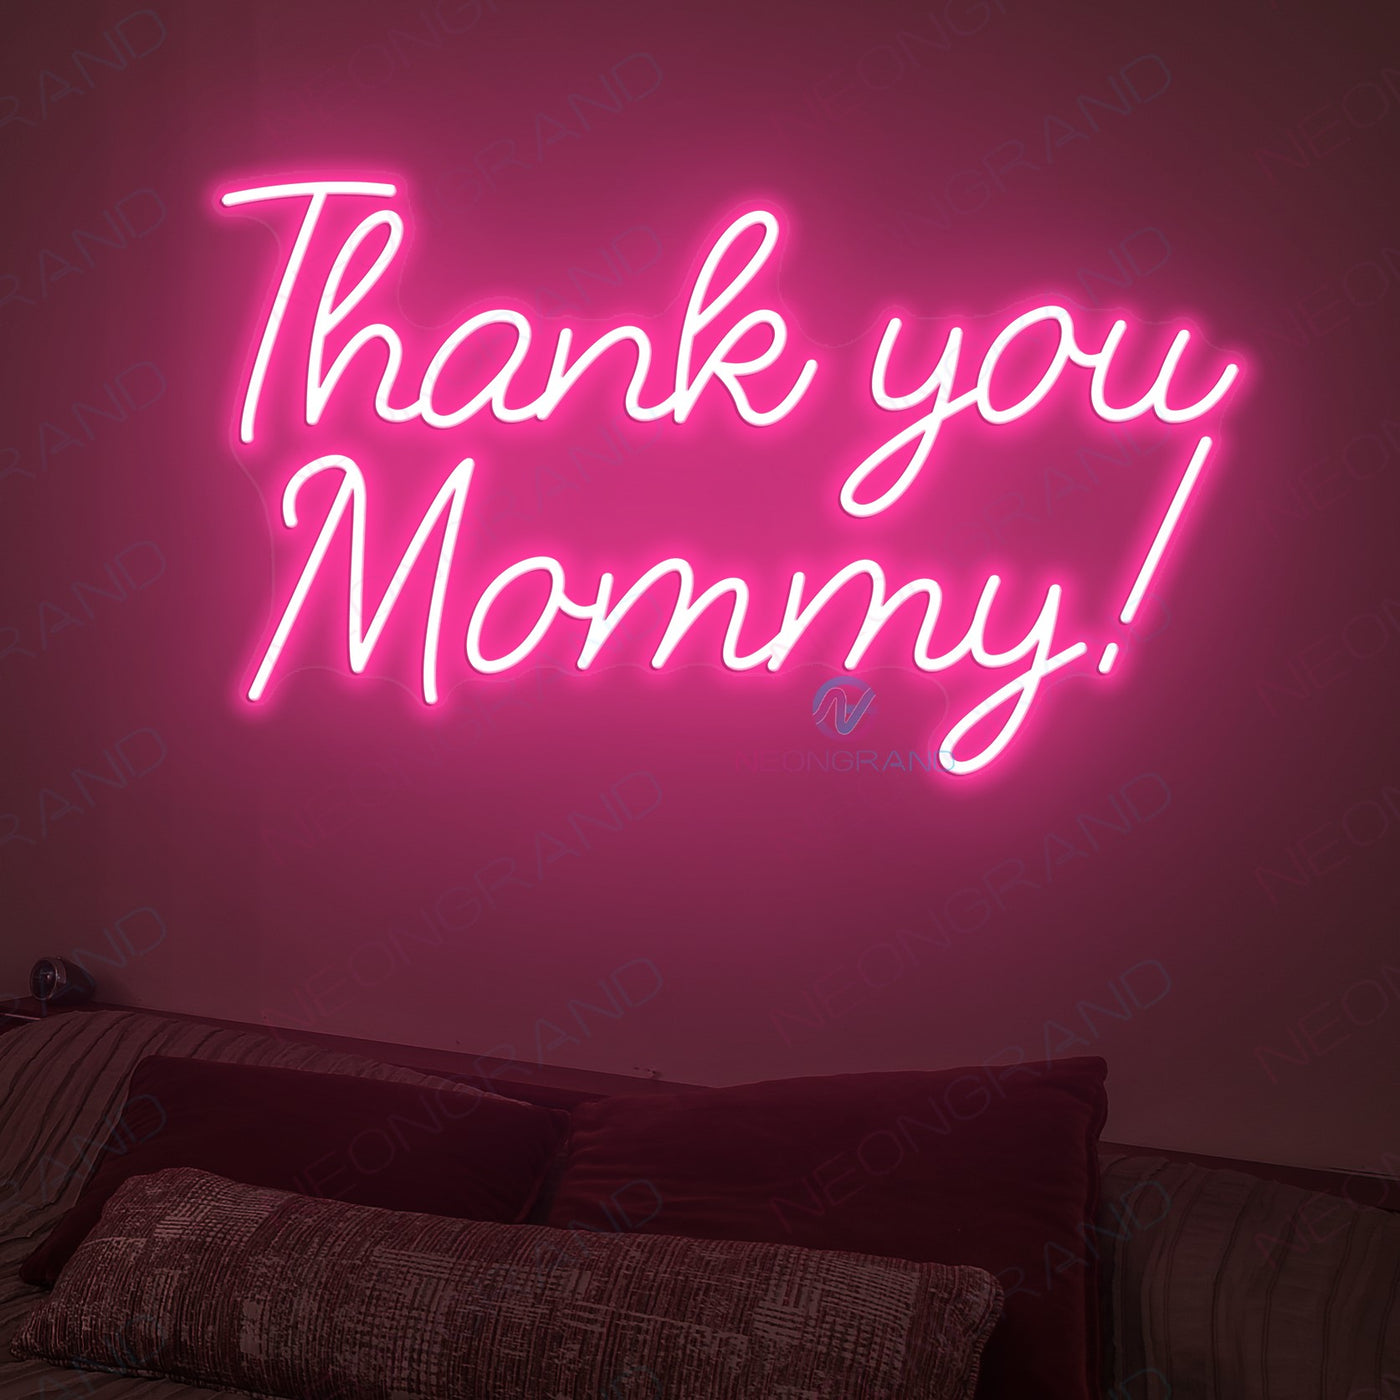 Thank you Mommy Neon Mom Sign Led Light